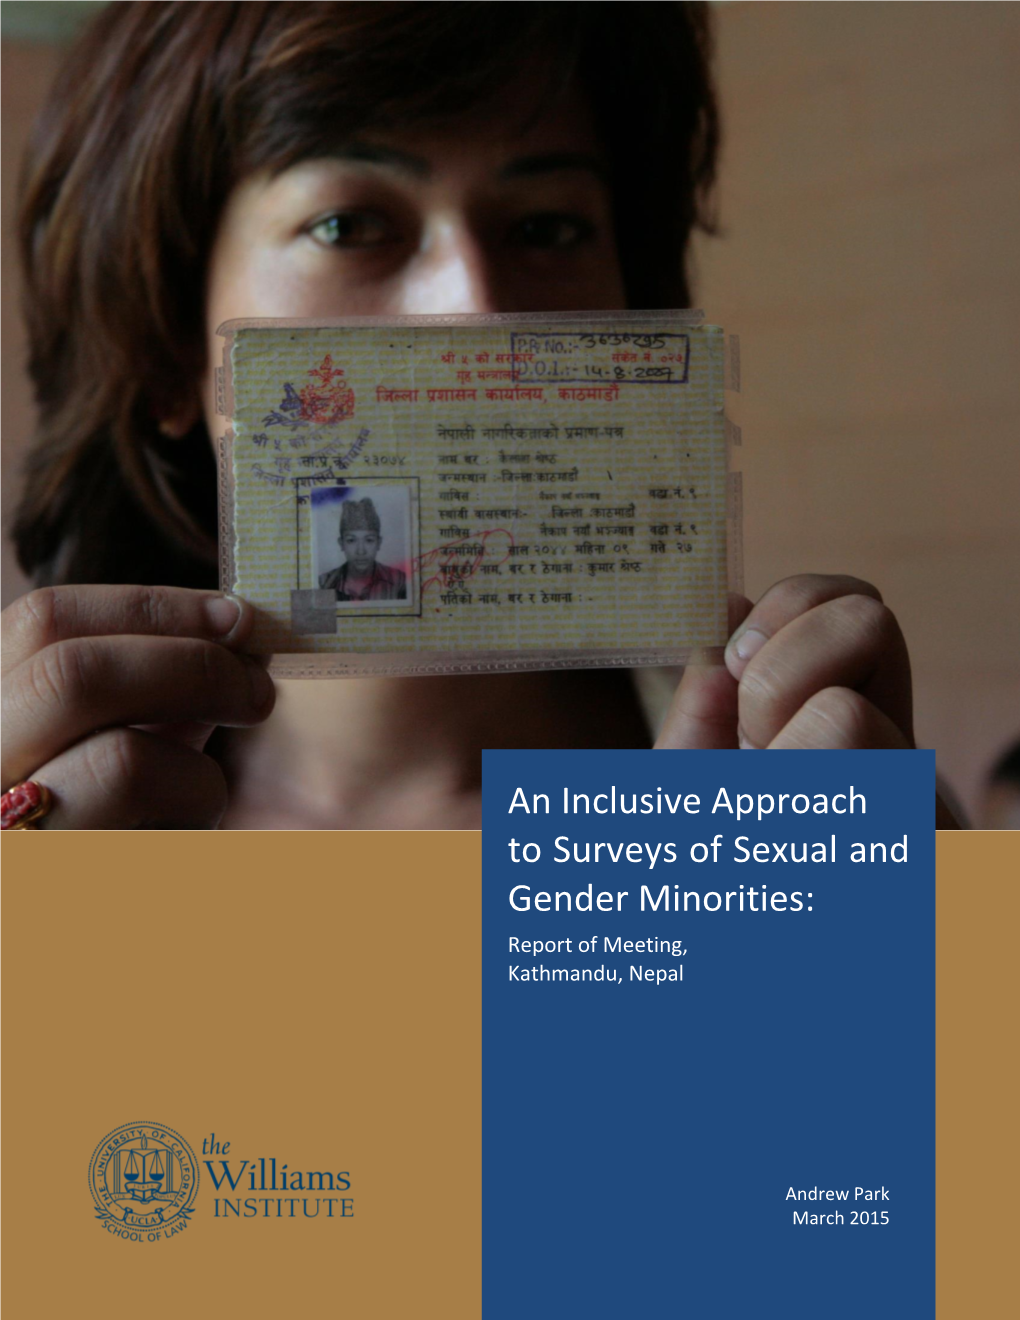 An Inclusive Approach to Surveys of Sexual and Gender Minorities: Report of Meeting, Kathmandu, Nepal